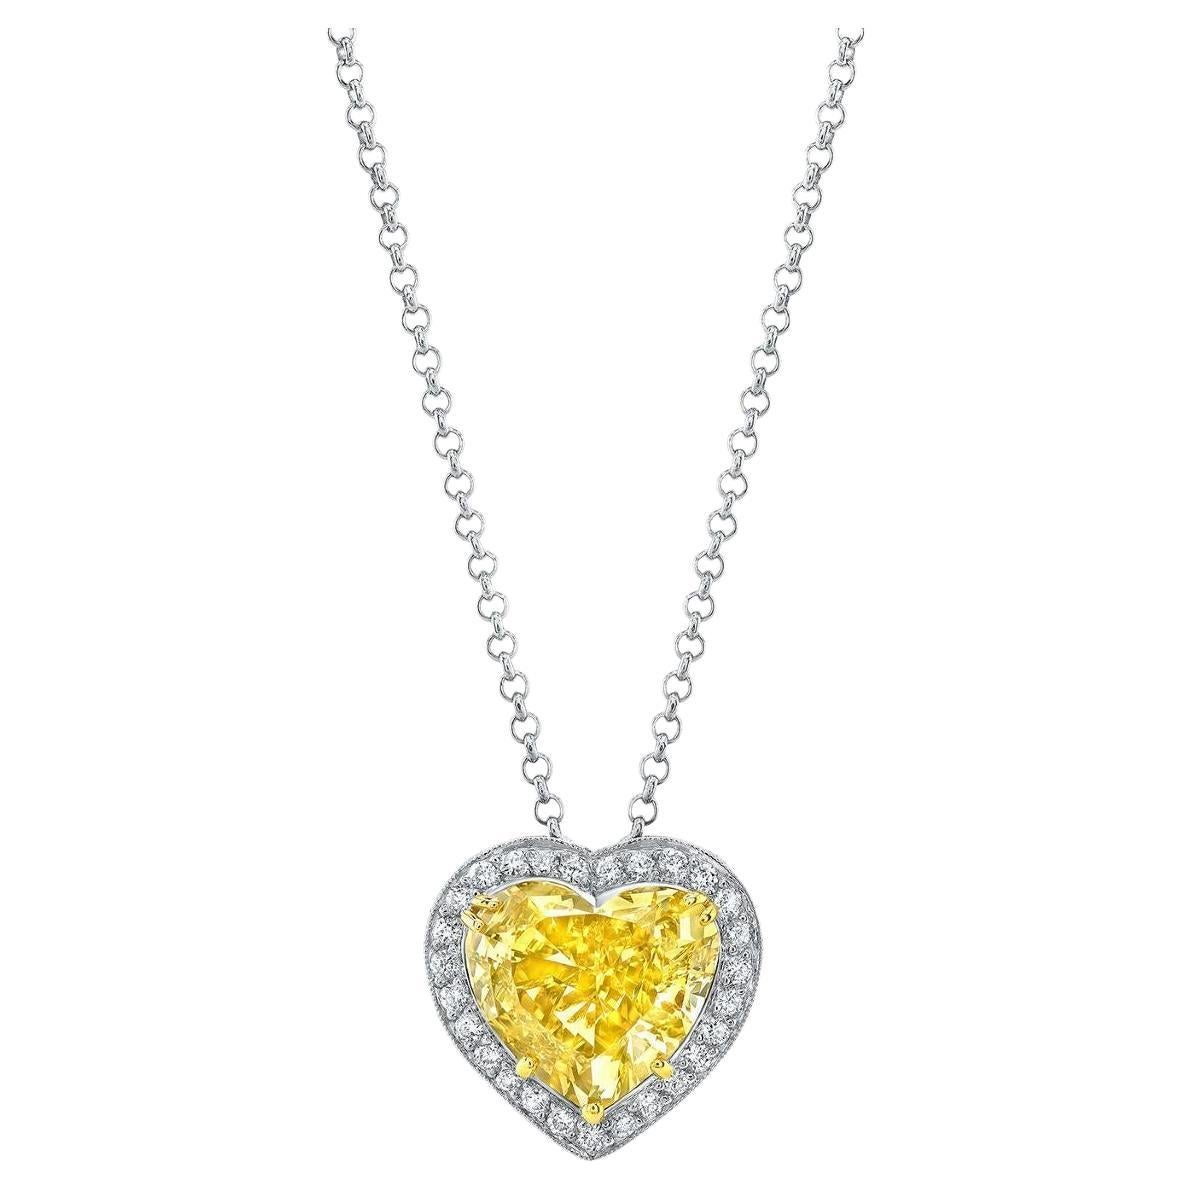 A platinum pendant showcasing exquisite craftsmanship, featuring a 5.08-carat Fancy Brownish Yellow/VS2 GIA-certified Heart Shape Diamond at its center. Surrounding the captivating centerpiece are 27 Round Brilliant cut Diamonds, collectively